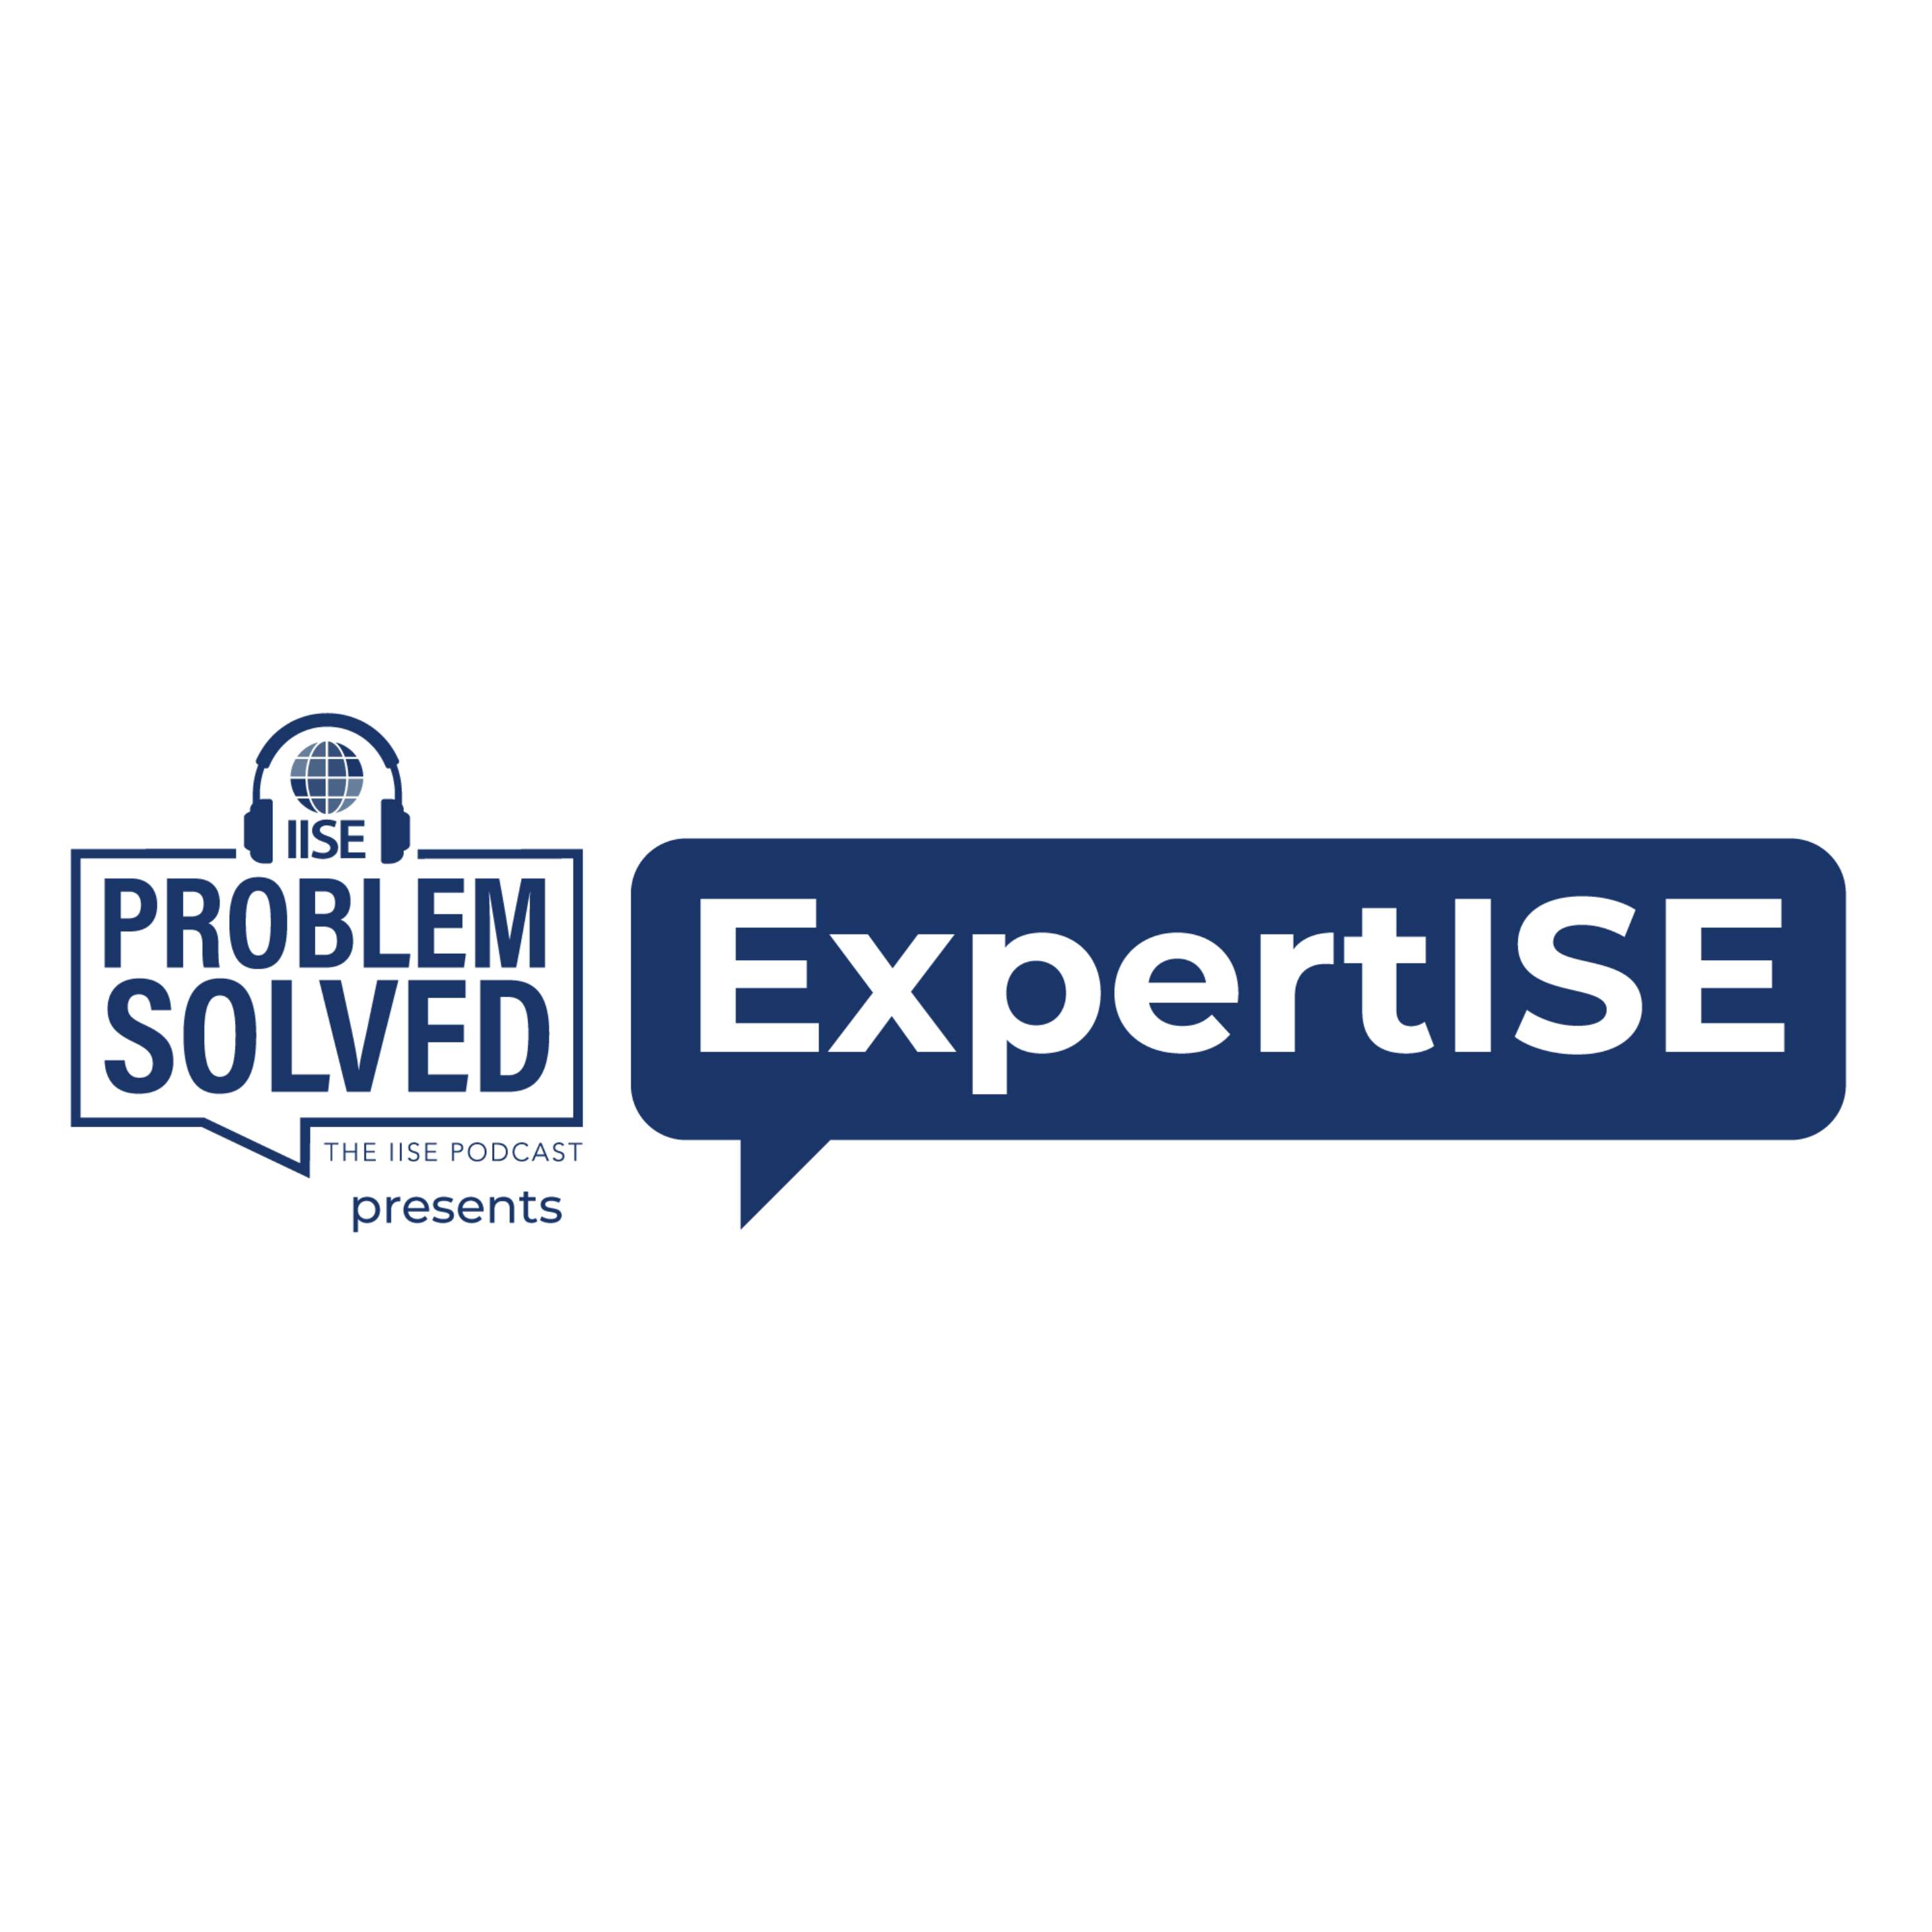 ExpertISE: The intersection of ISE and remote work